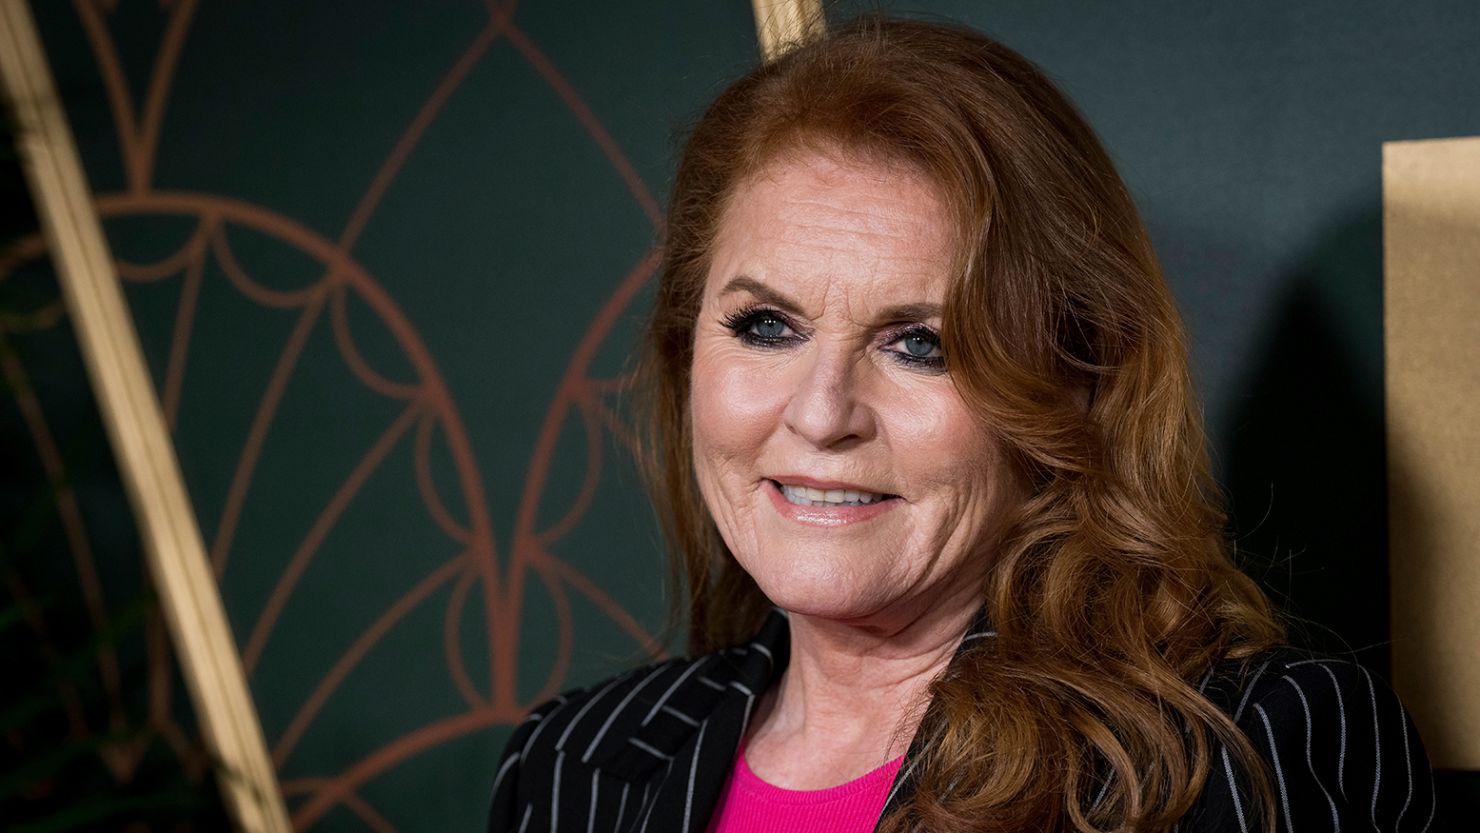 Sarah Ferguson arrives at the UK premiere of the film 'Marlowe' in London on March 16, 2023.